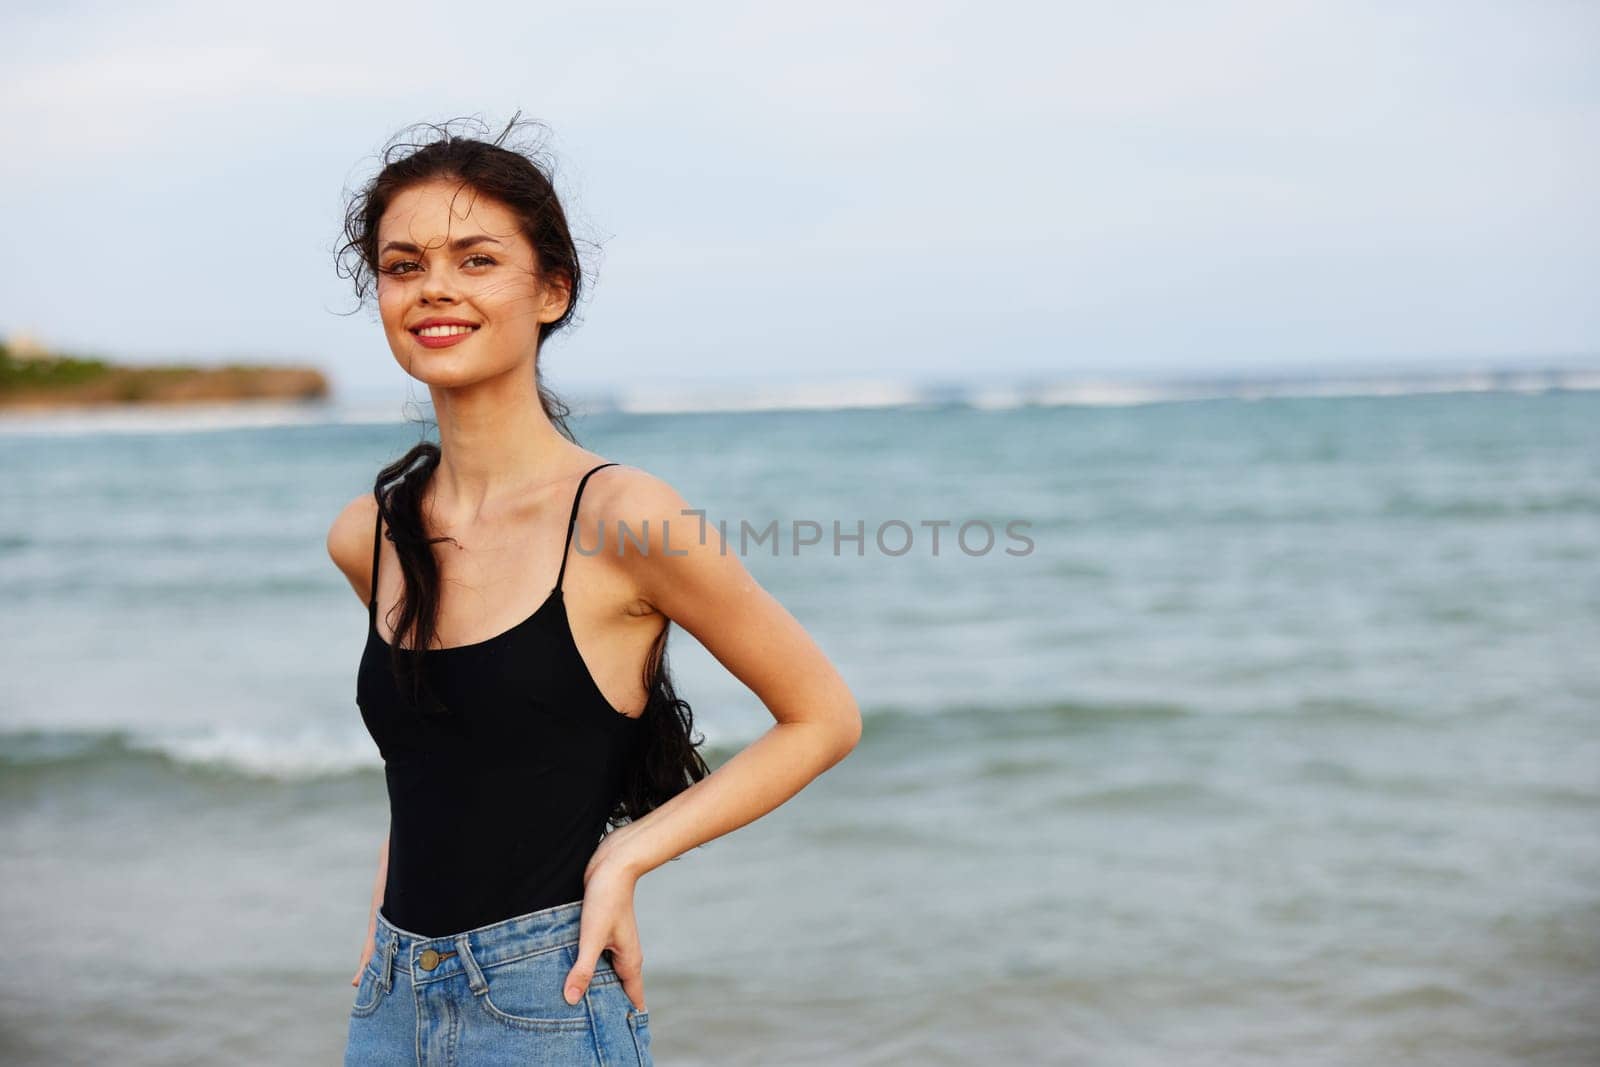 sand woman nature sea lifestyle summer beach smile sunset vacation ocean by SHOTPRIME